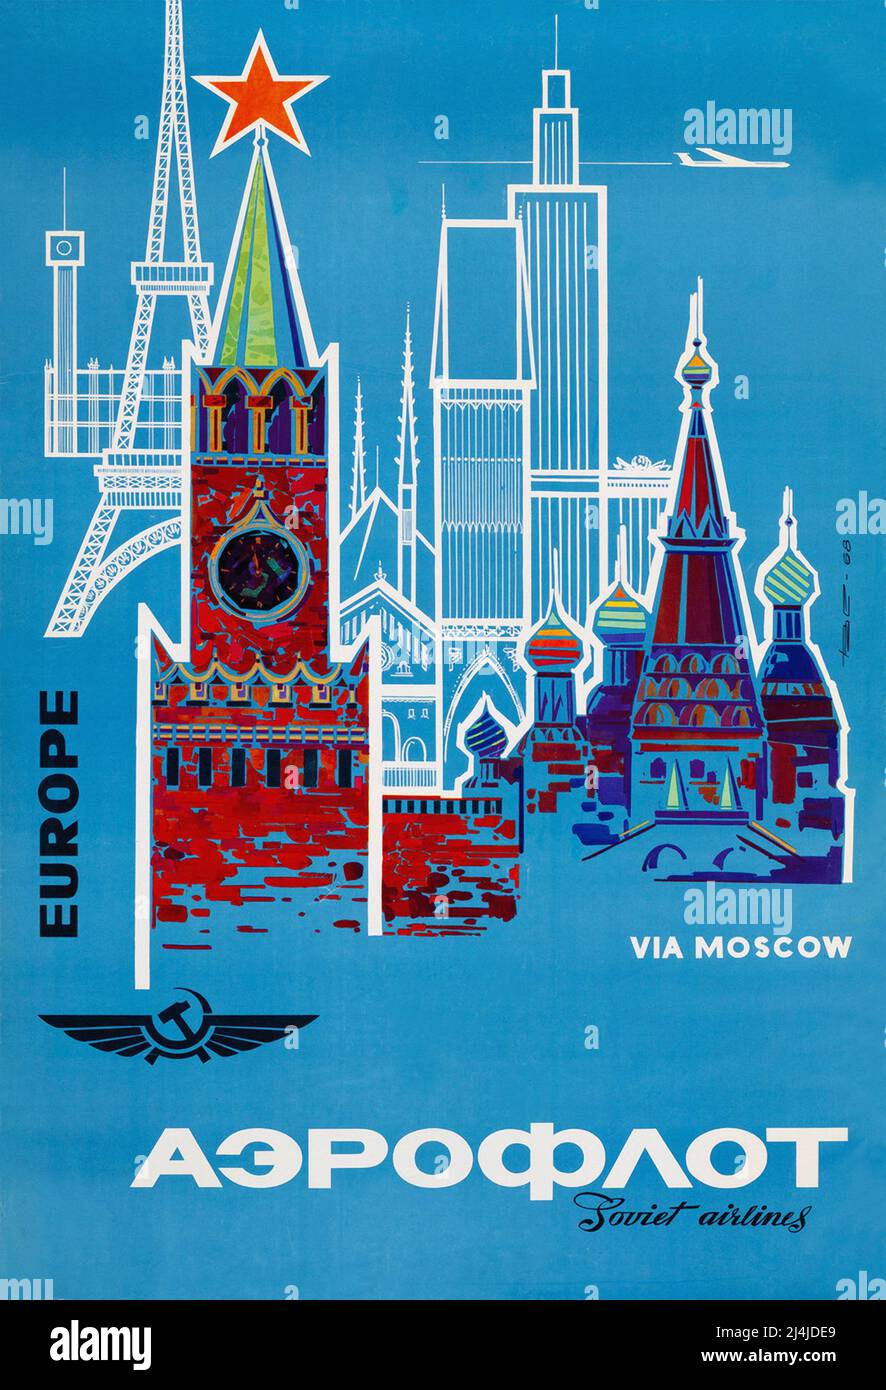 Pacifica Island Art Europe via Mosca Aeroflot Russian Airlines National Airline of Russia - Vintage Airline Travel Poster c.1968 Foto Stock